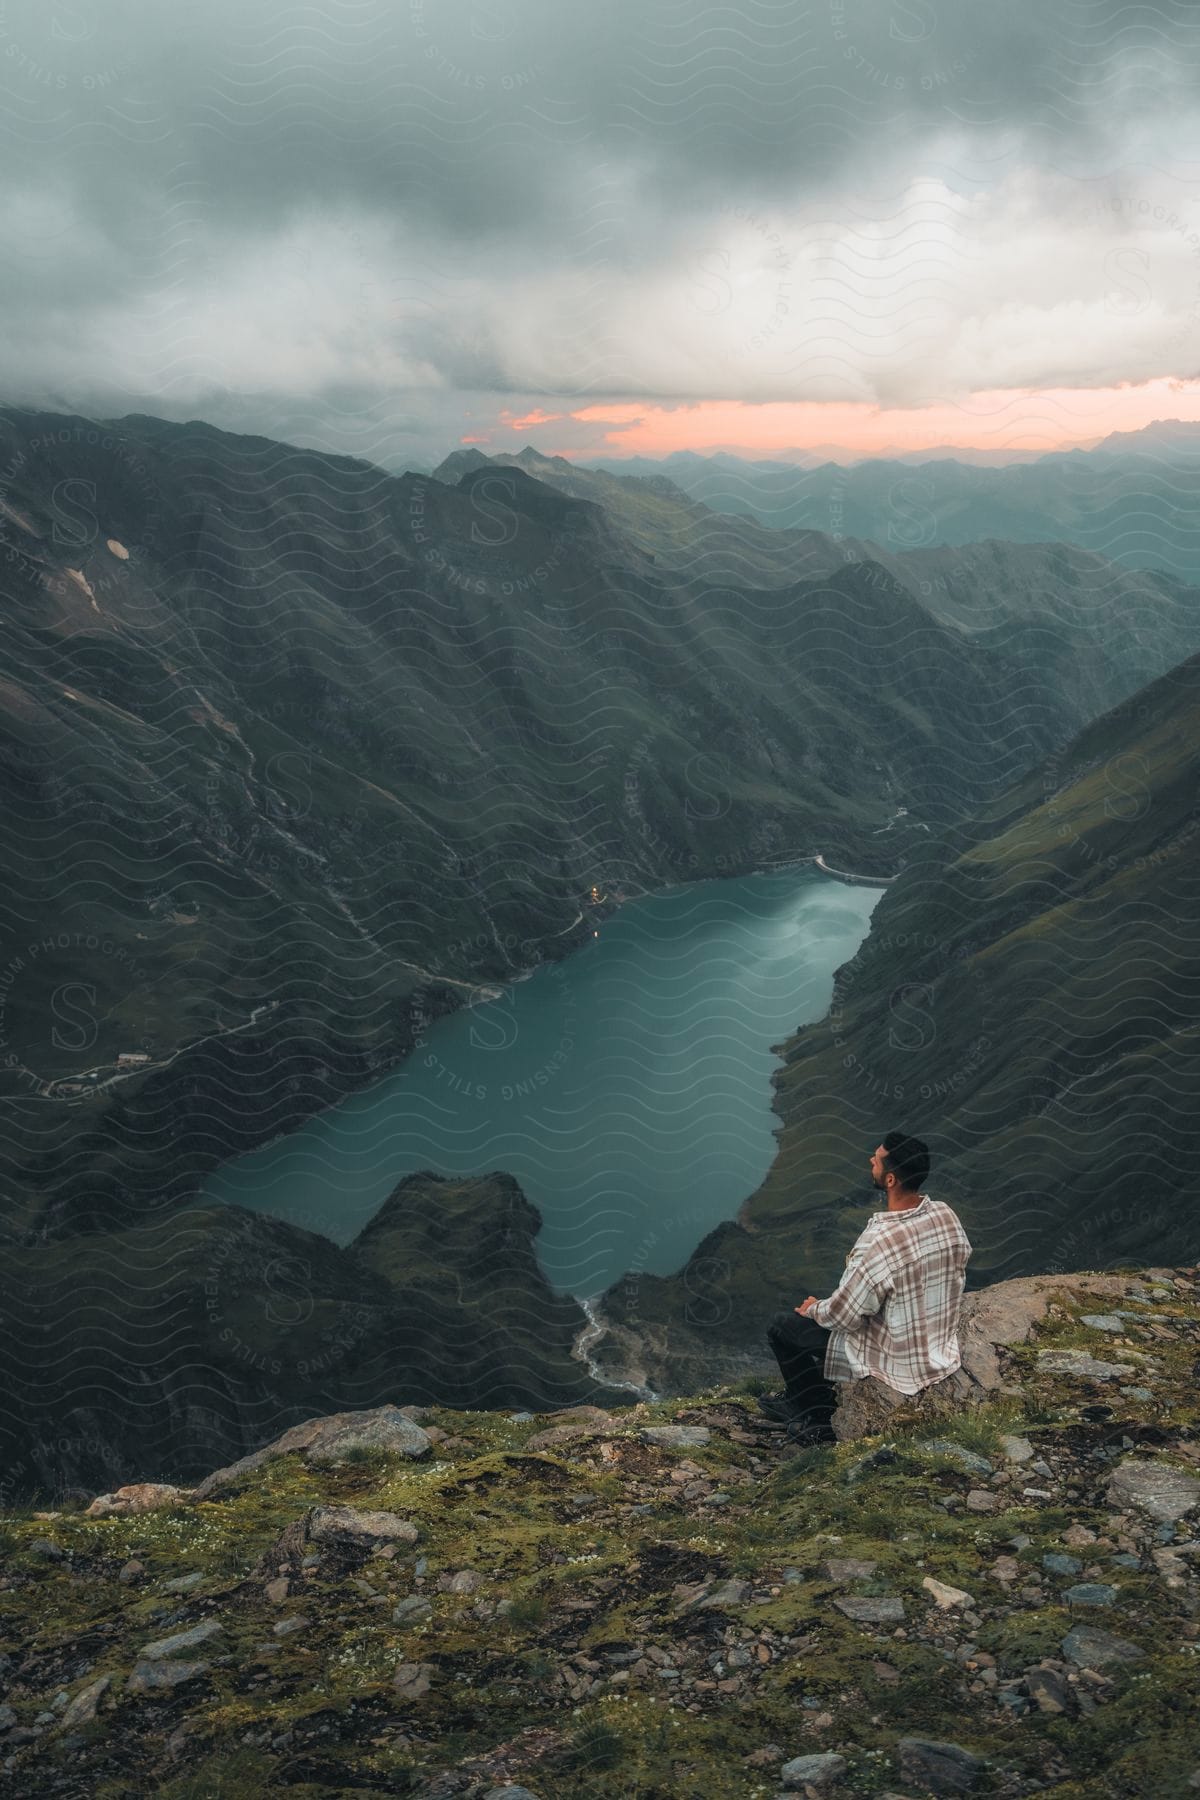 A man sitting on the edge of a cliff overlooking a lake and mountains